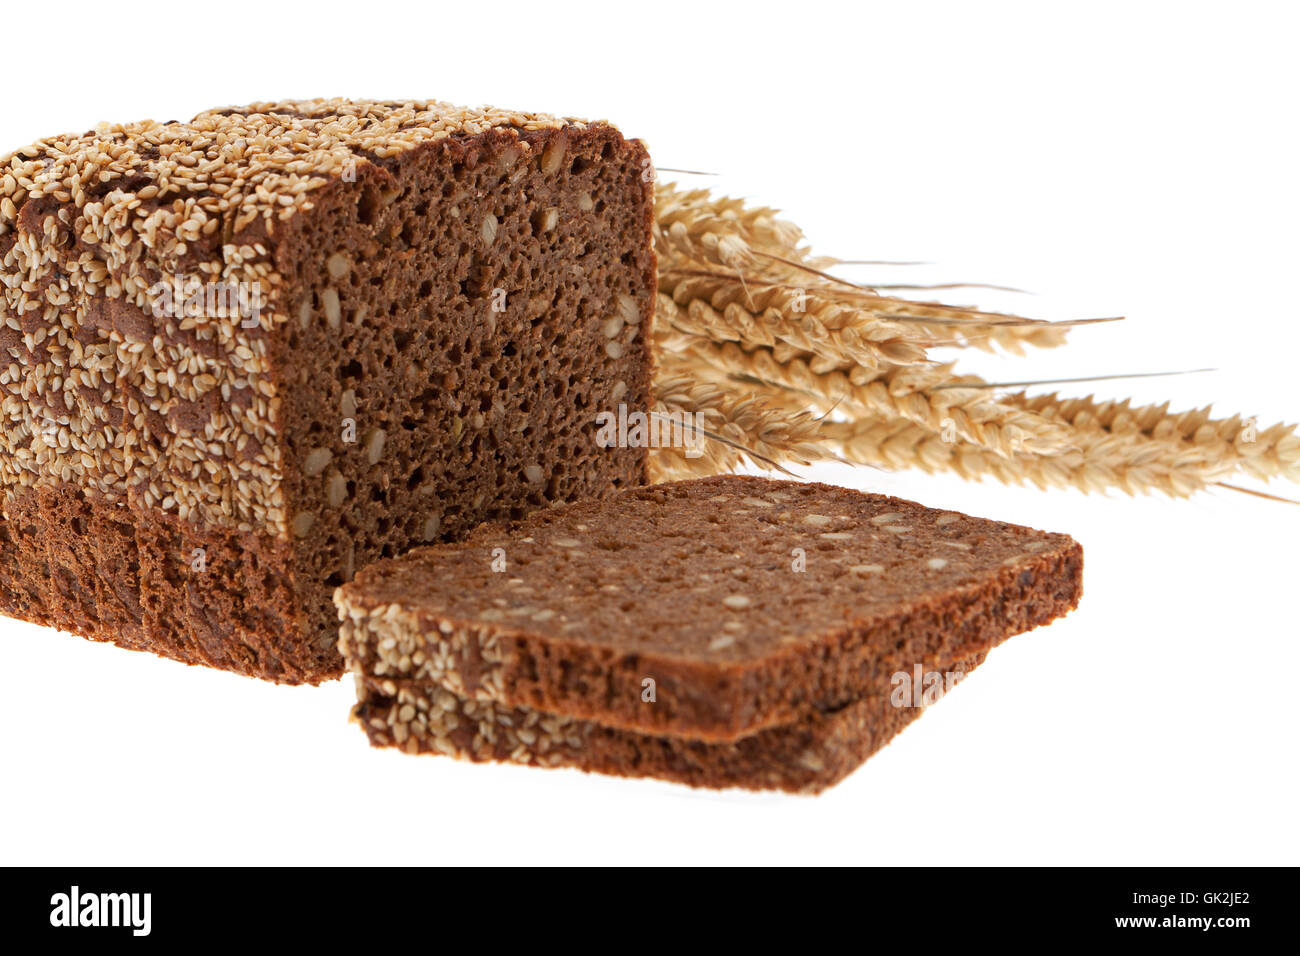 wholemeal bread with cereals Stock Photo